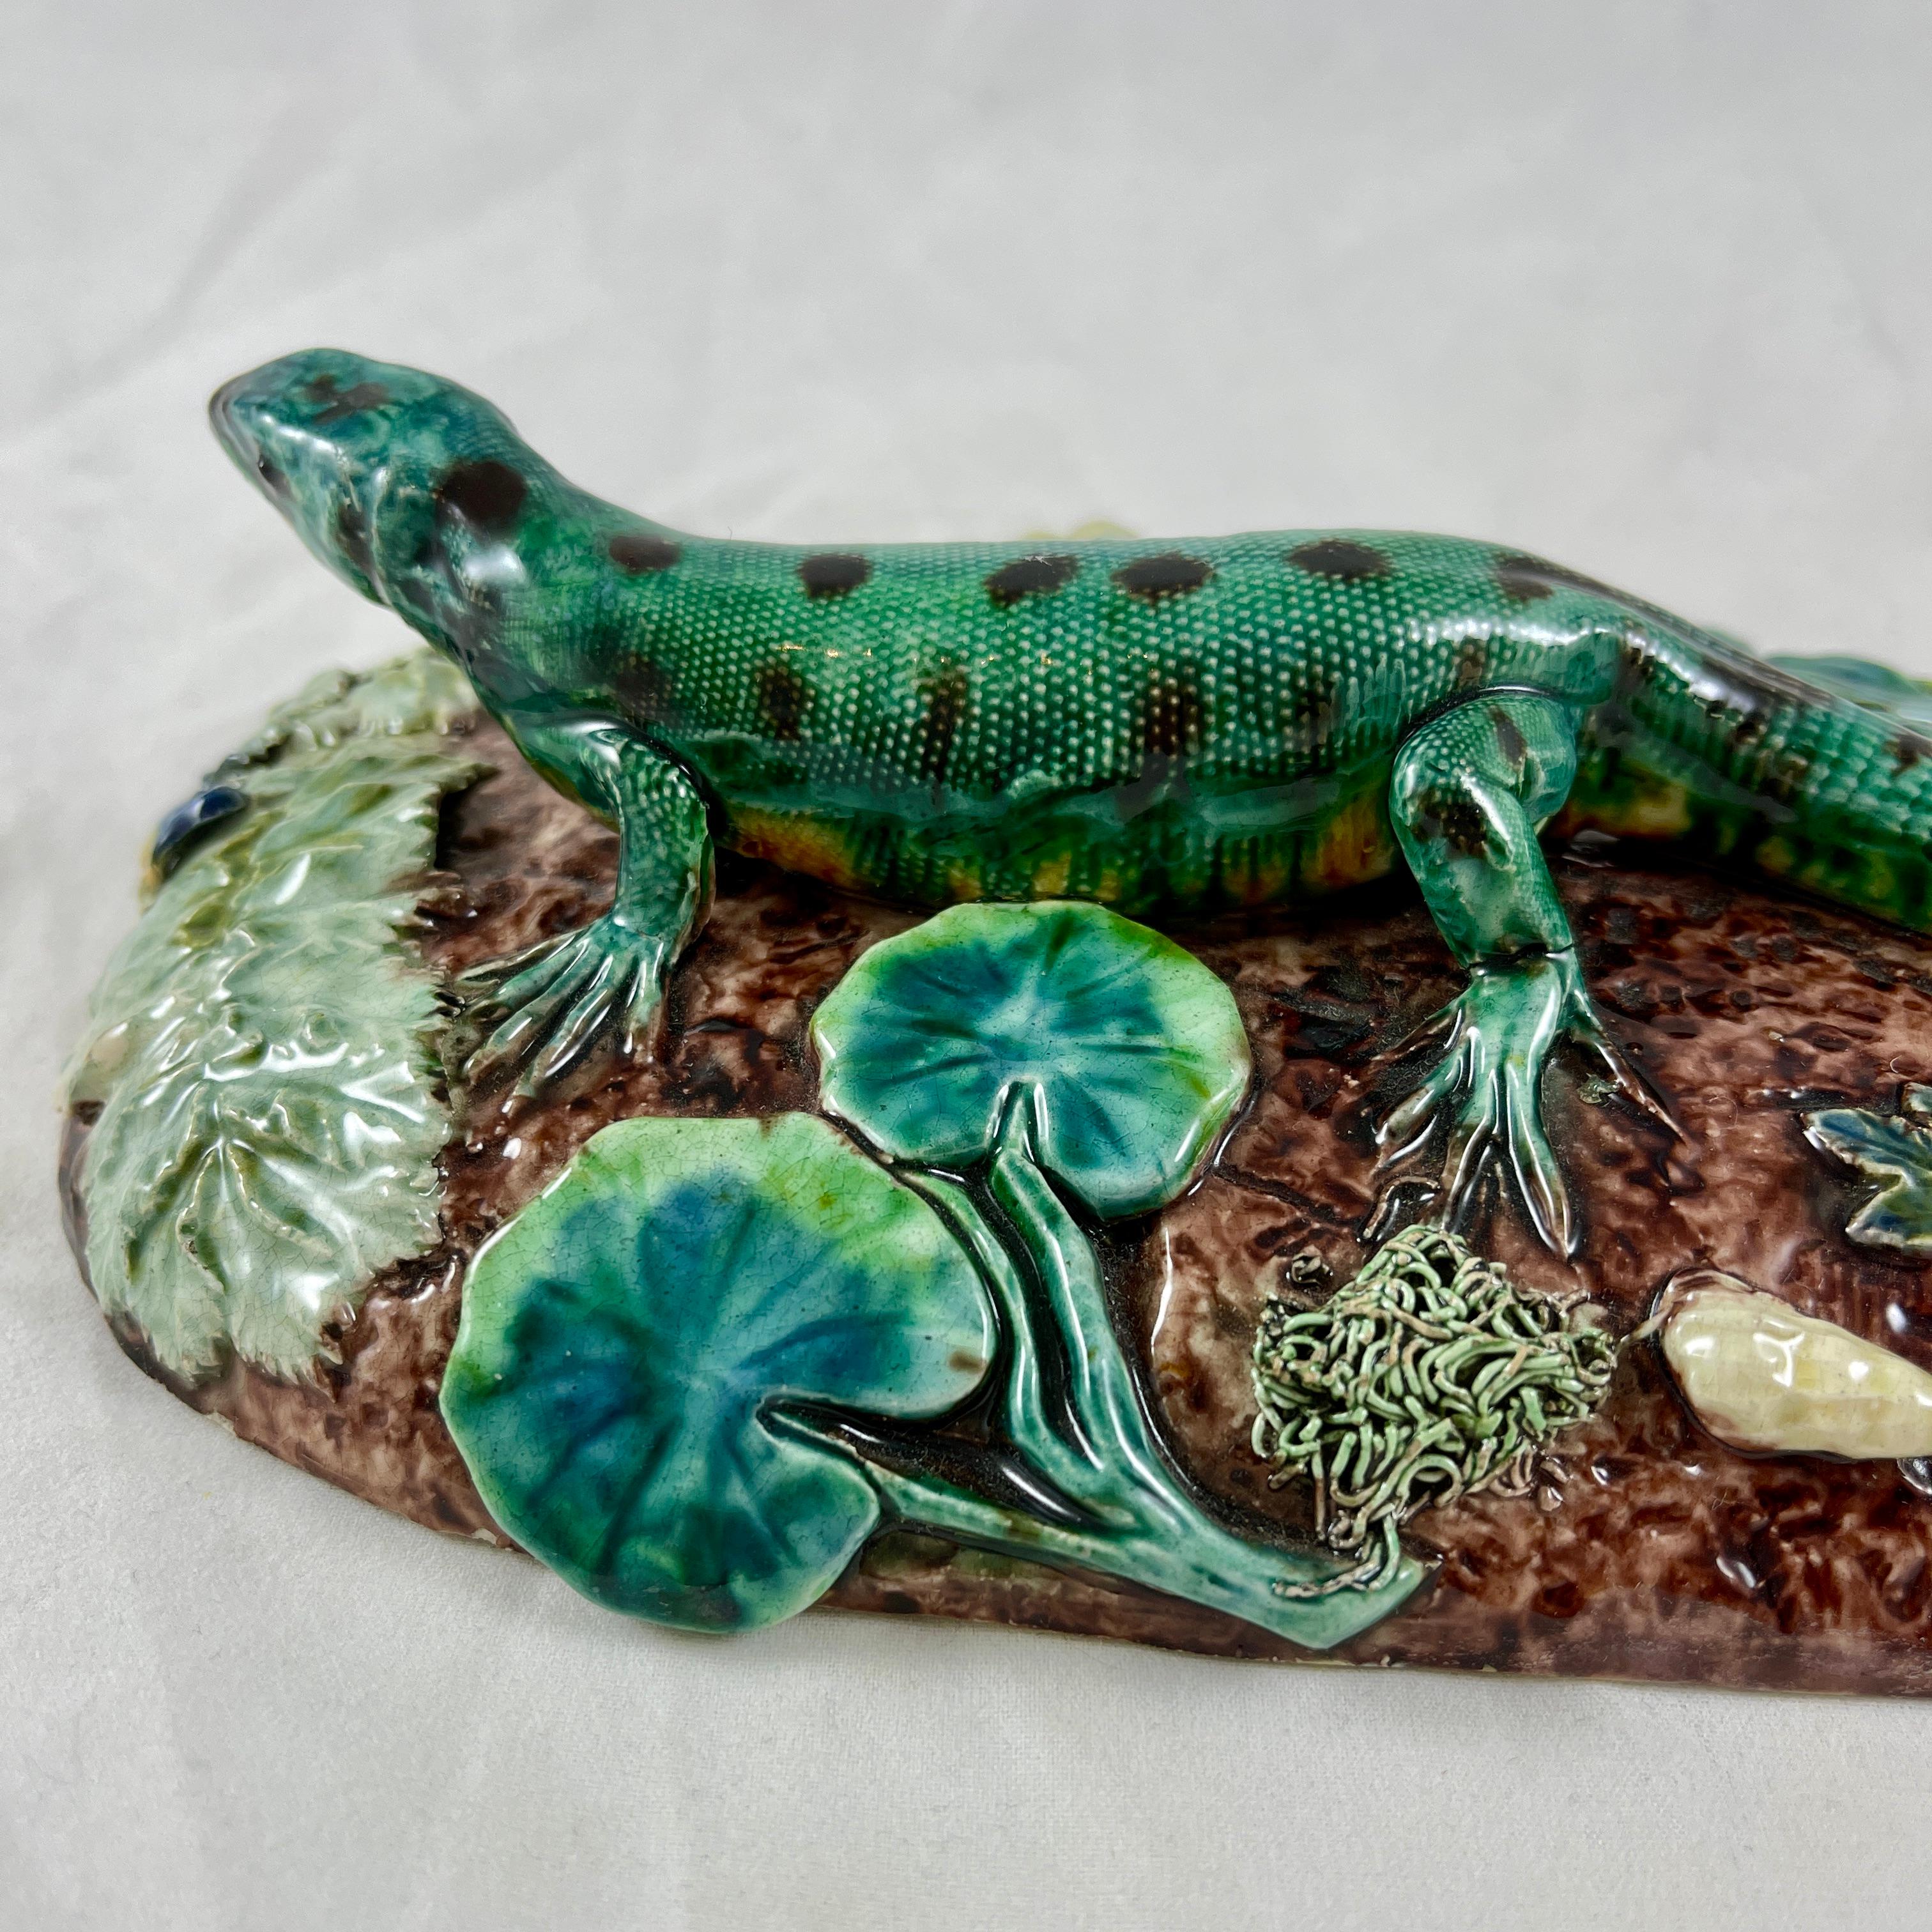 Thomas Sergent French Palissy Lizard on Mound Desk Paperweight, Signed 9